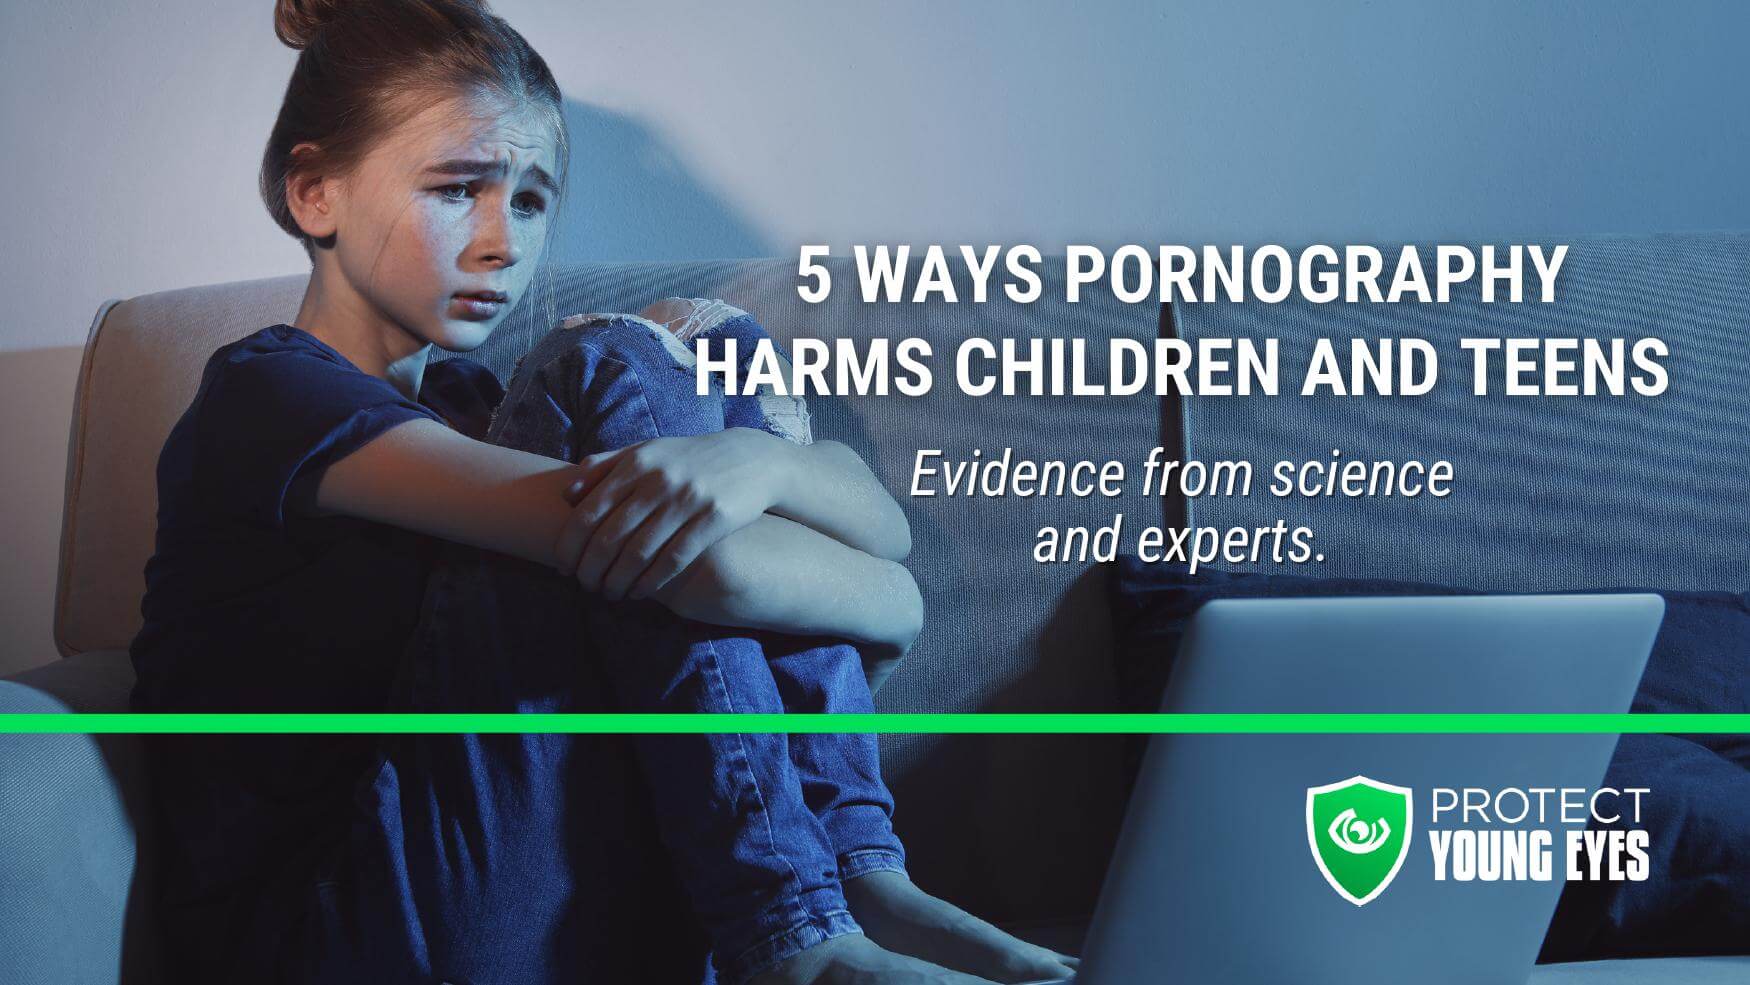 5 Ways Pornography Harms Children and Teens - Protect Young Eyes